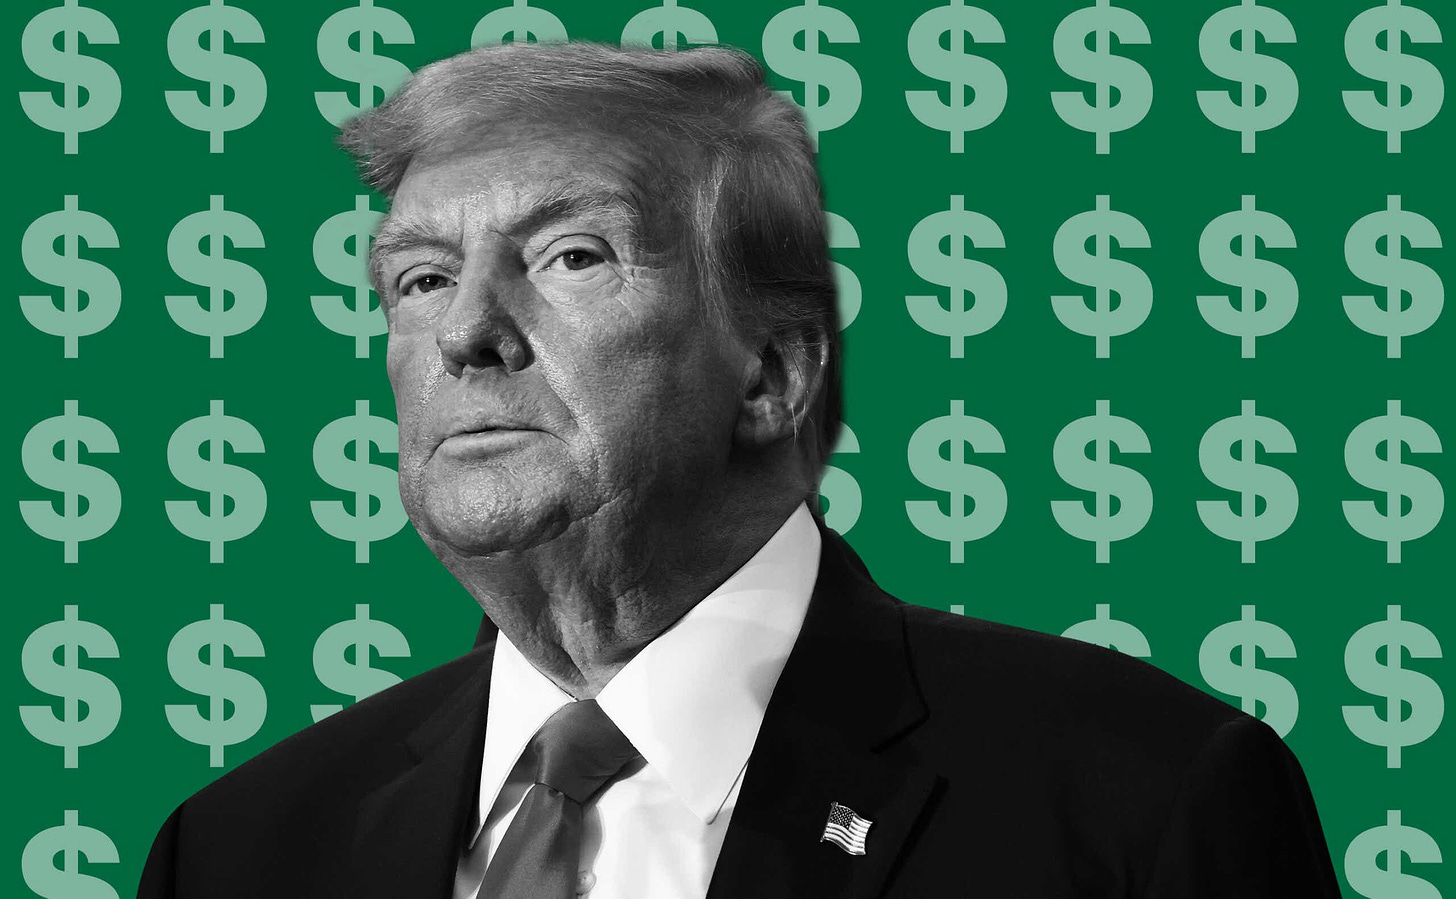 Trump's Business Empire Received Millions in Foreign Payments